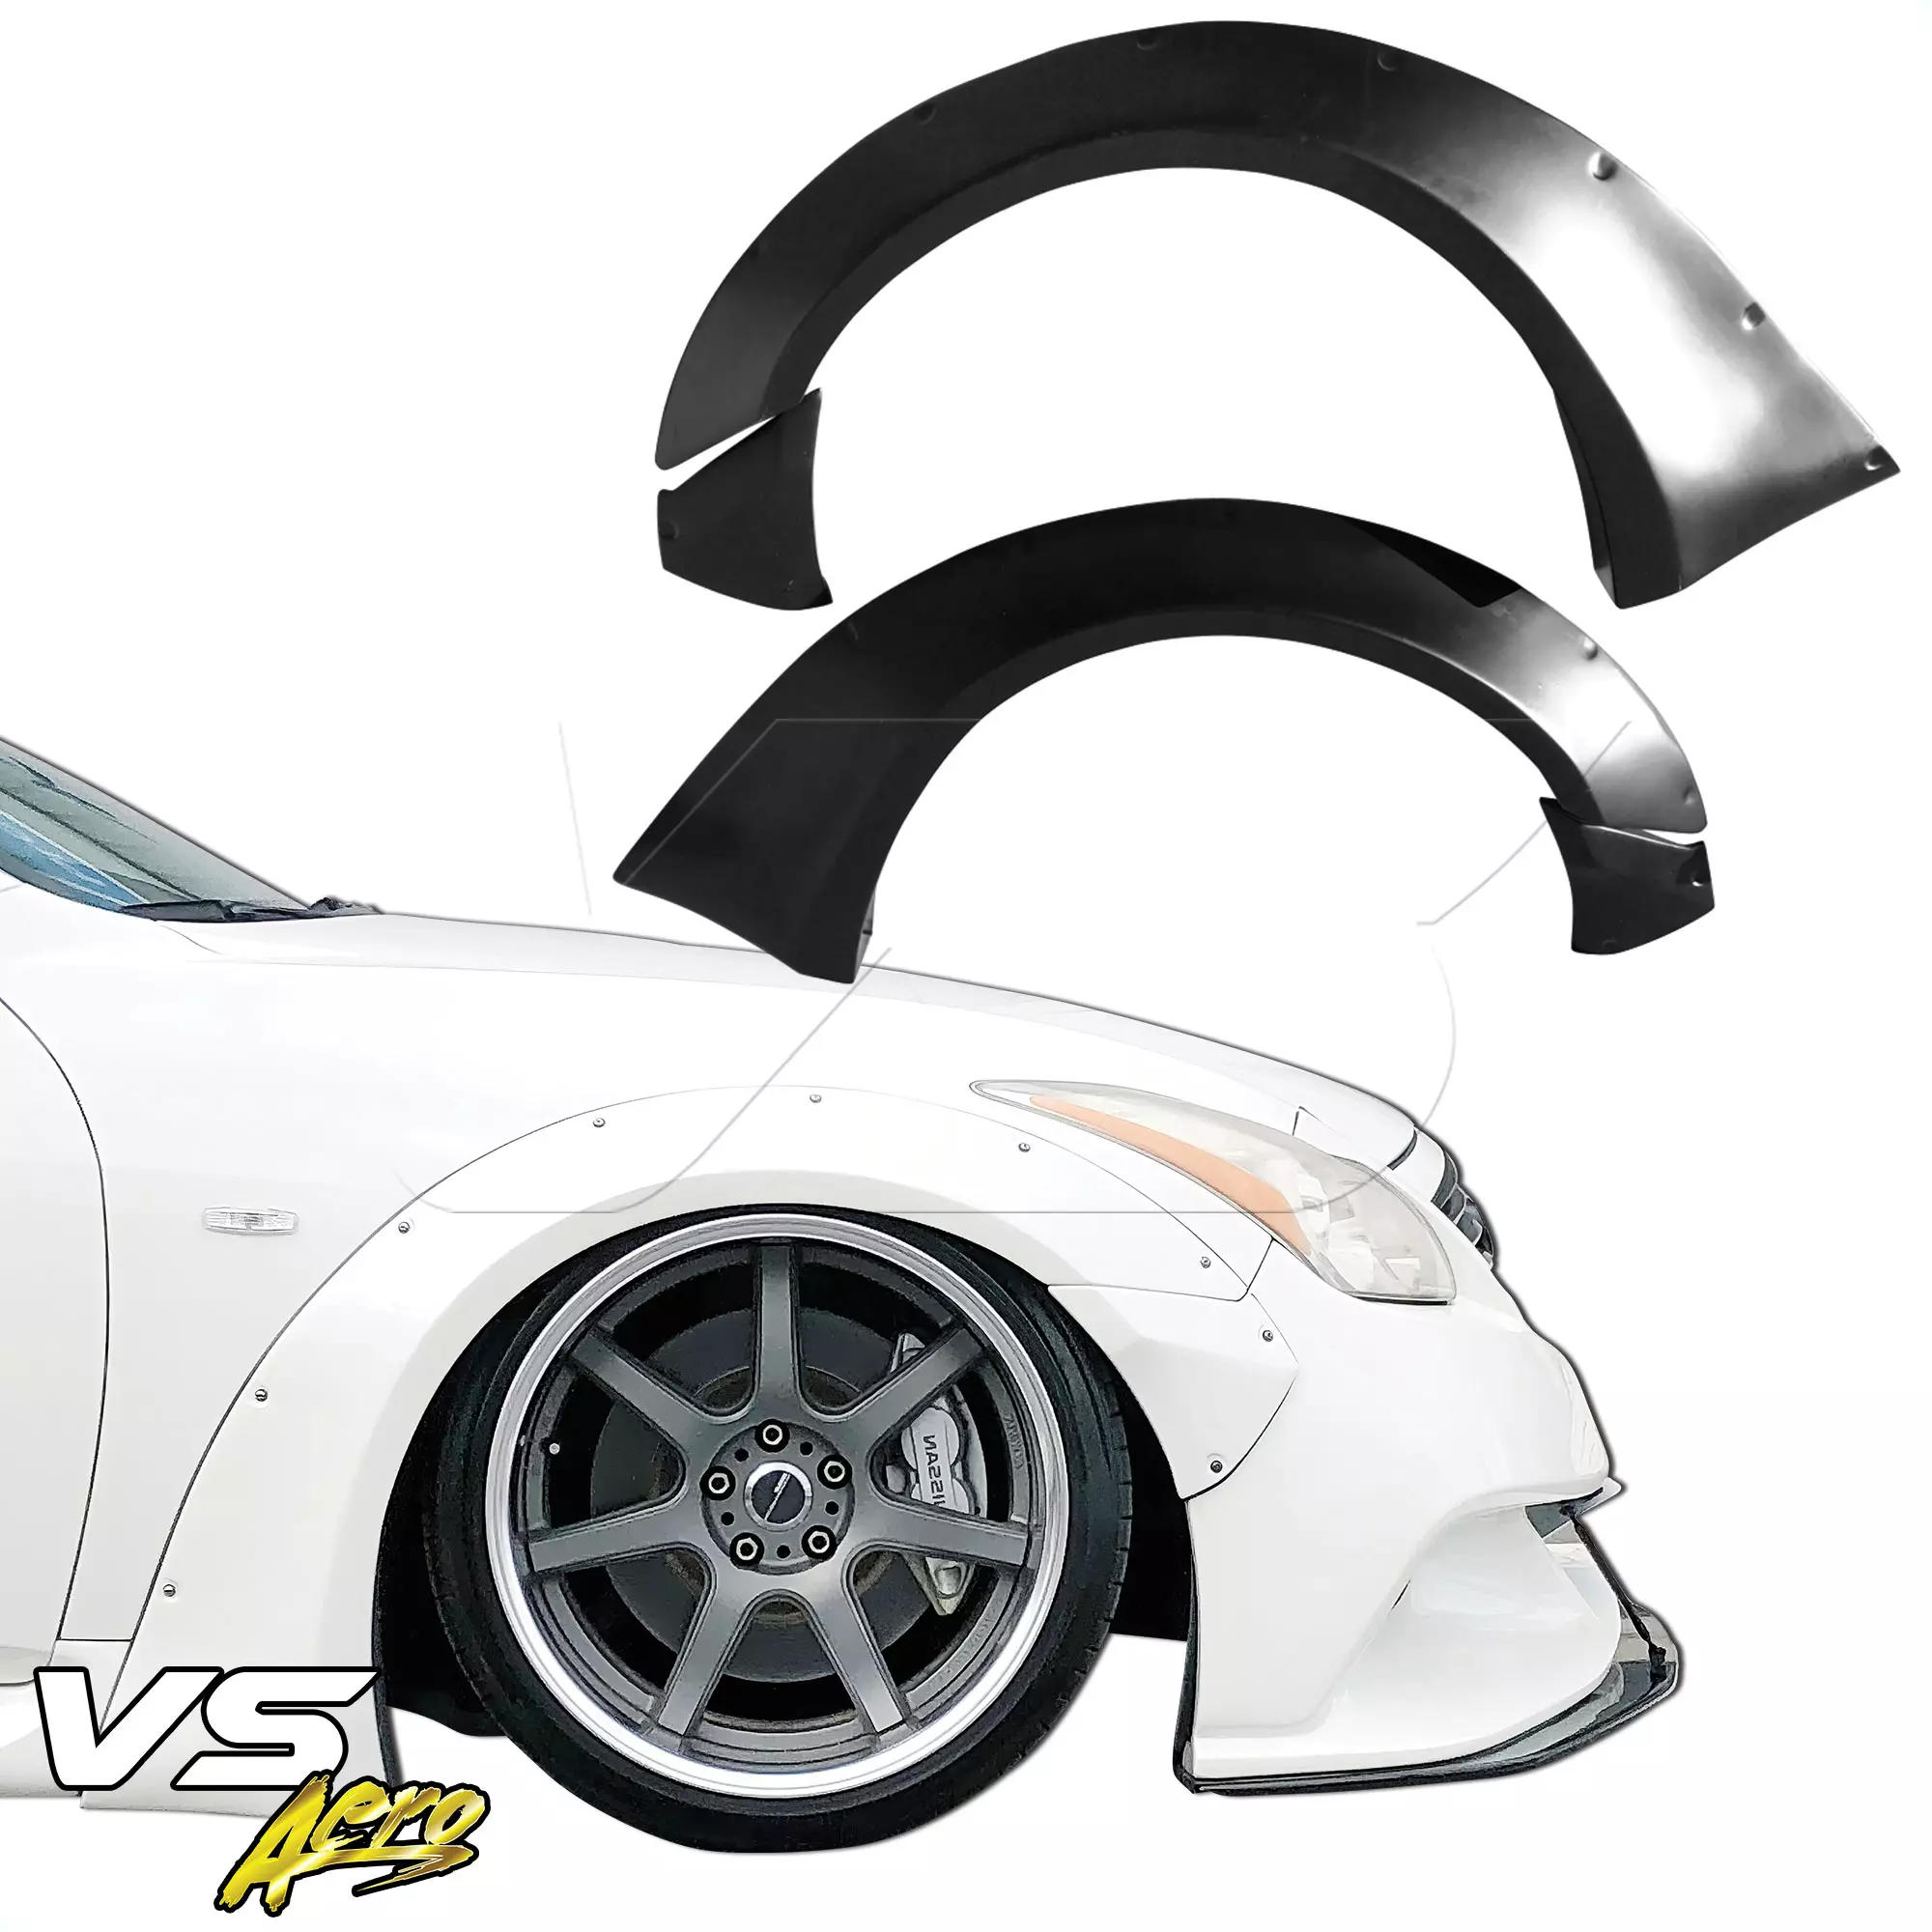 VSaero FRP LBPE Wide Body Fender Flares (front) 4pc > Infiniti G37 Coupe 2008-2015 > 2dr Coupe - Image 42